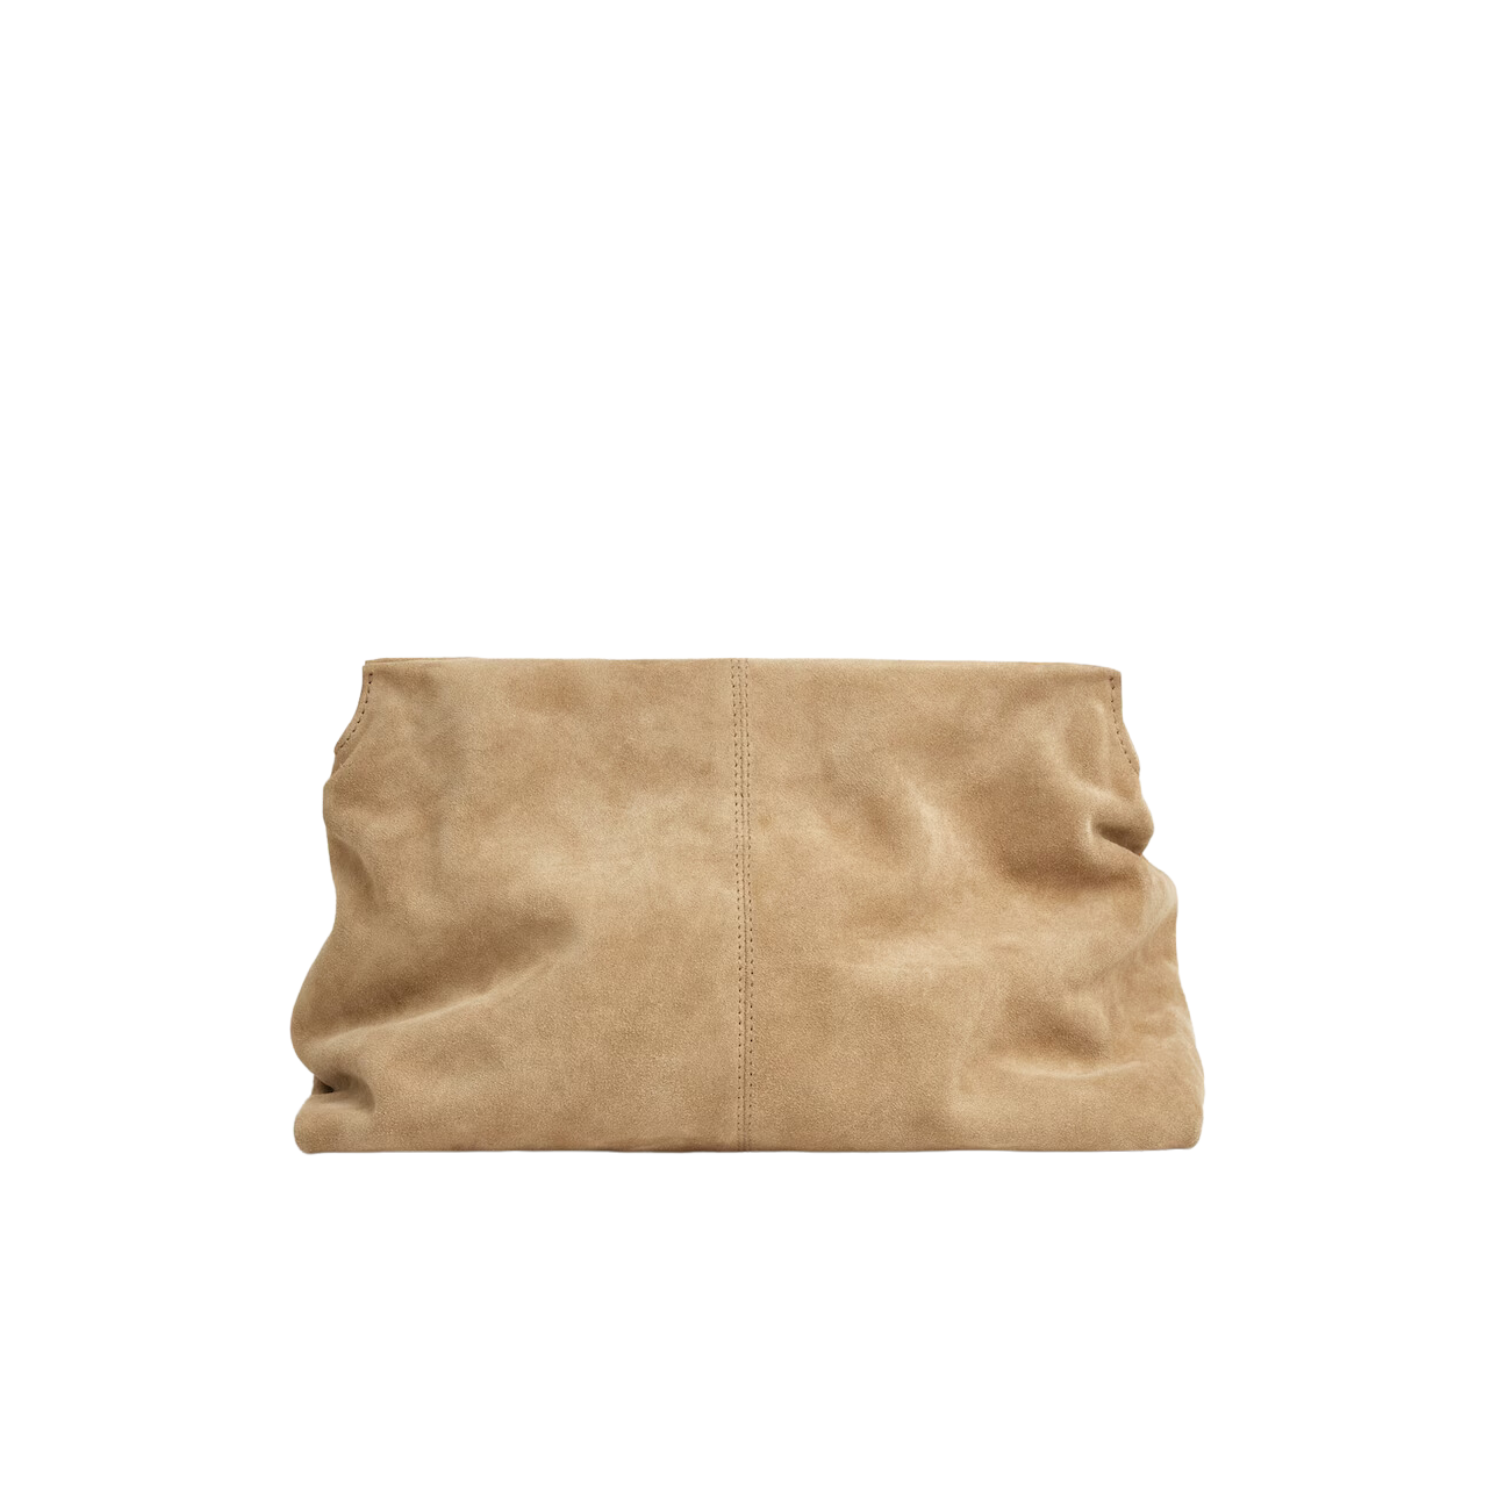 Flattered Clay Clutch Suede, $299